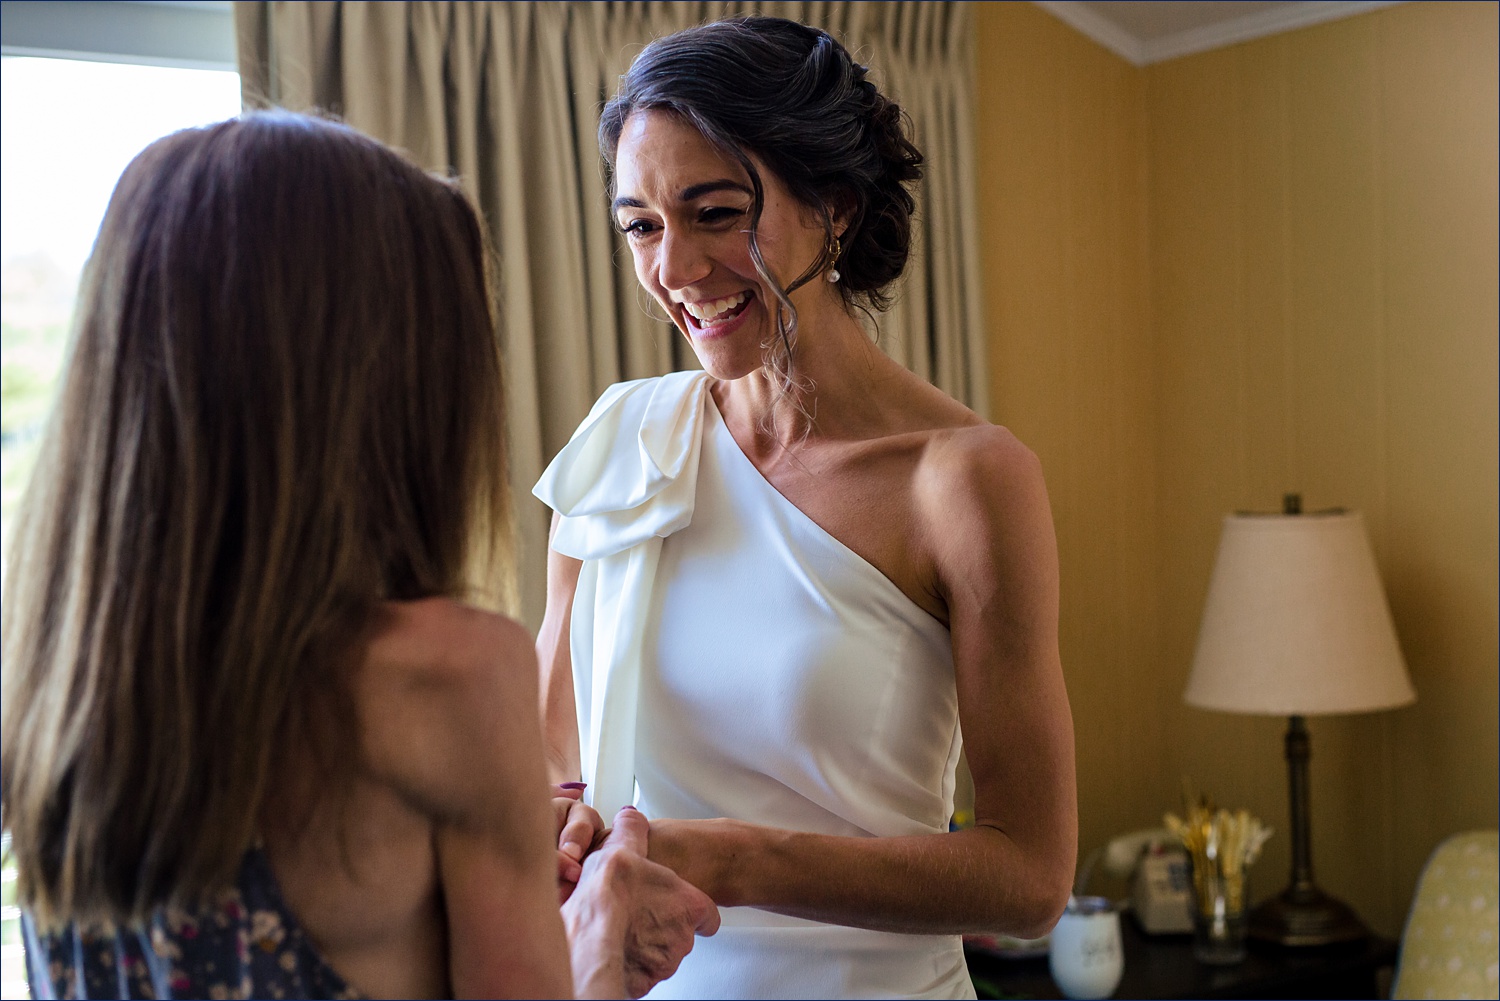 The bride greets her mom after putting on her wedding dress